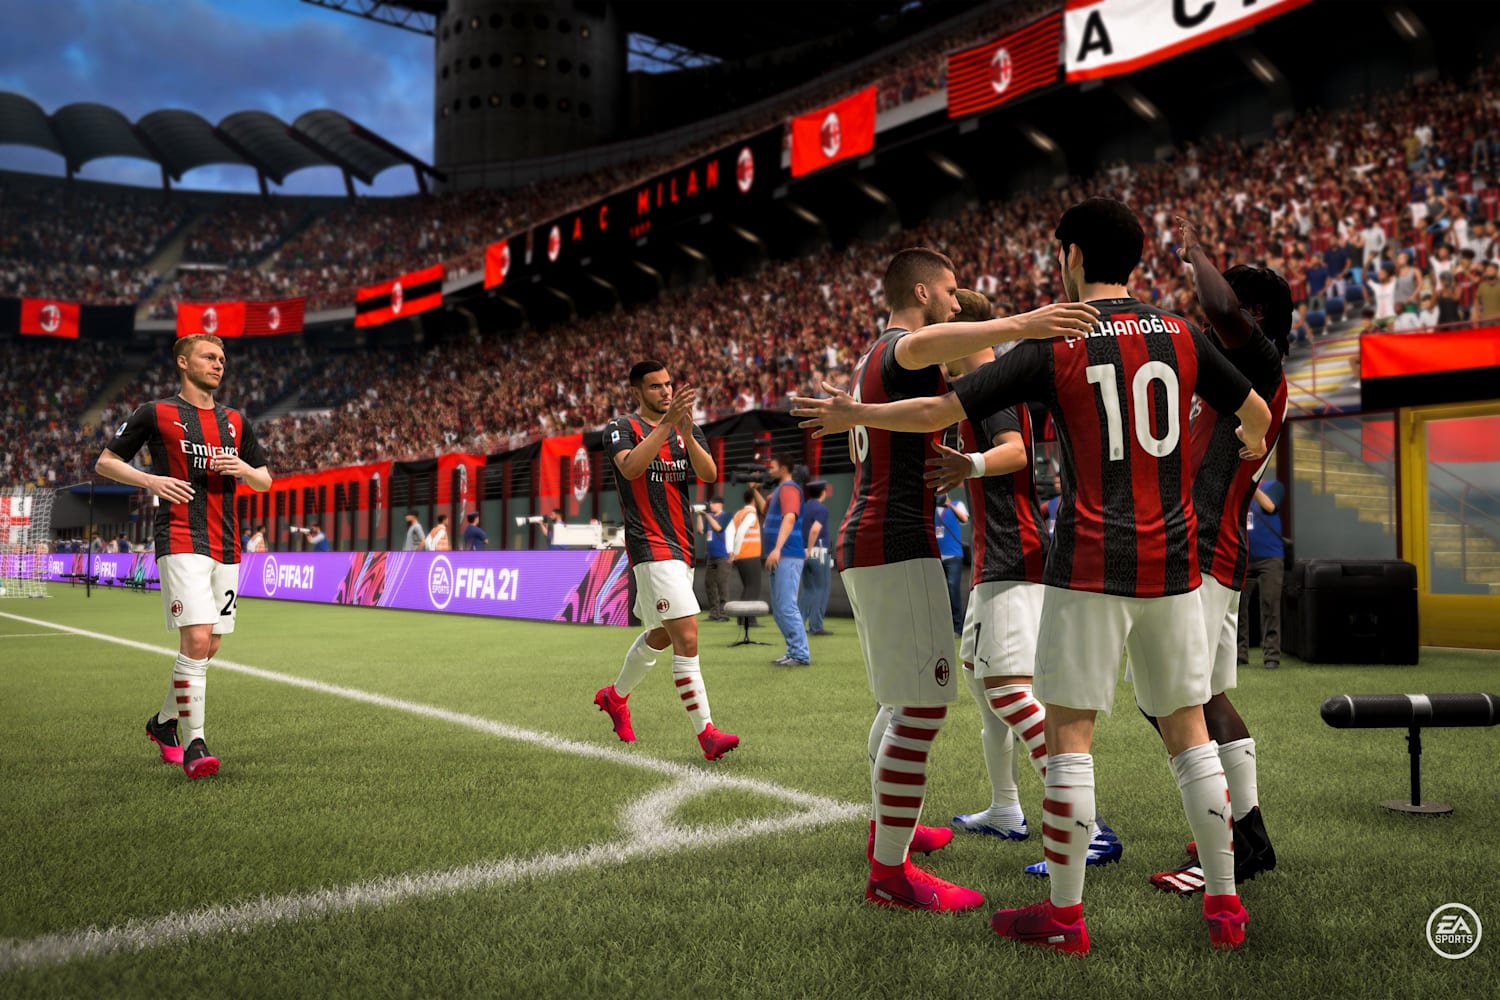 EA Sports won't release FIFA 21 demo this year | Eneba